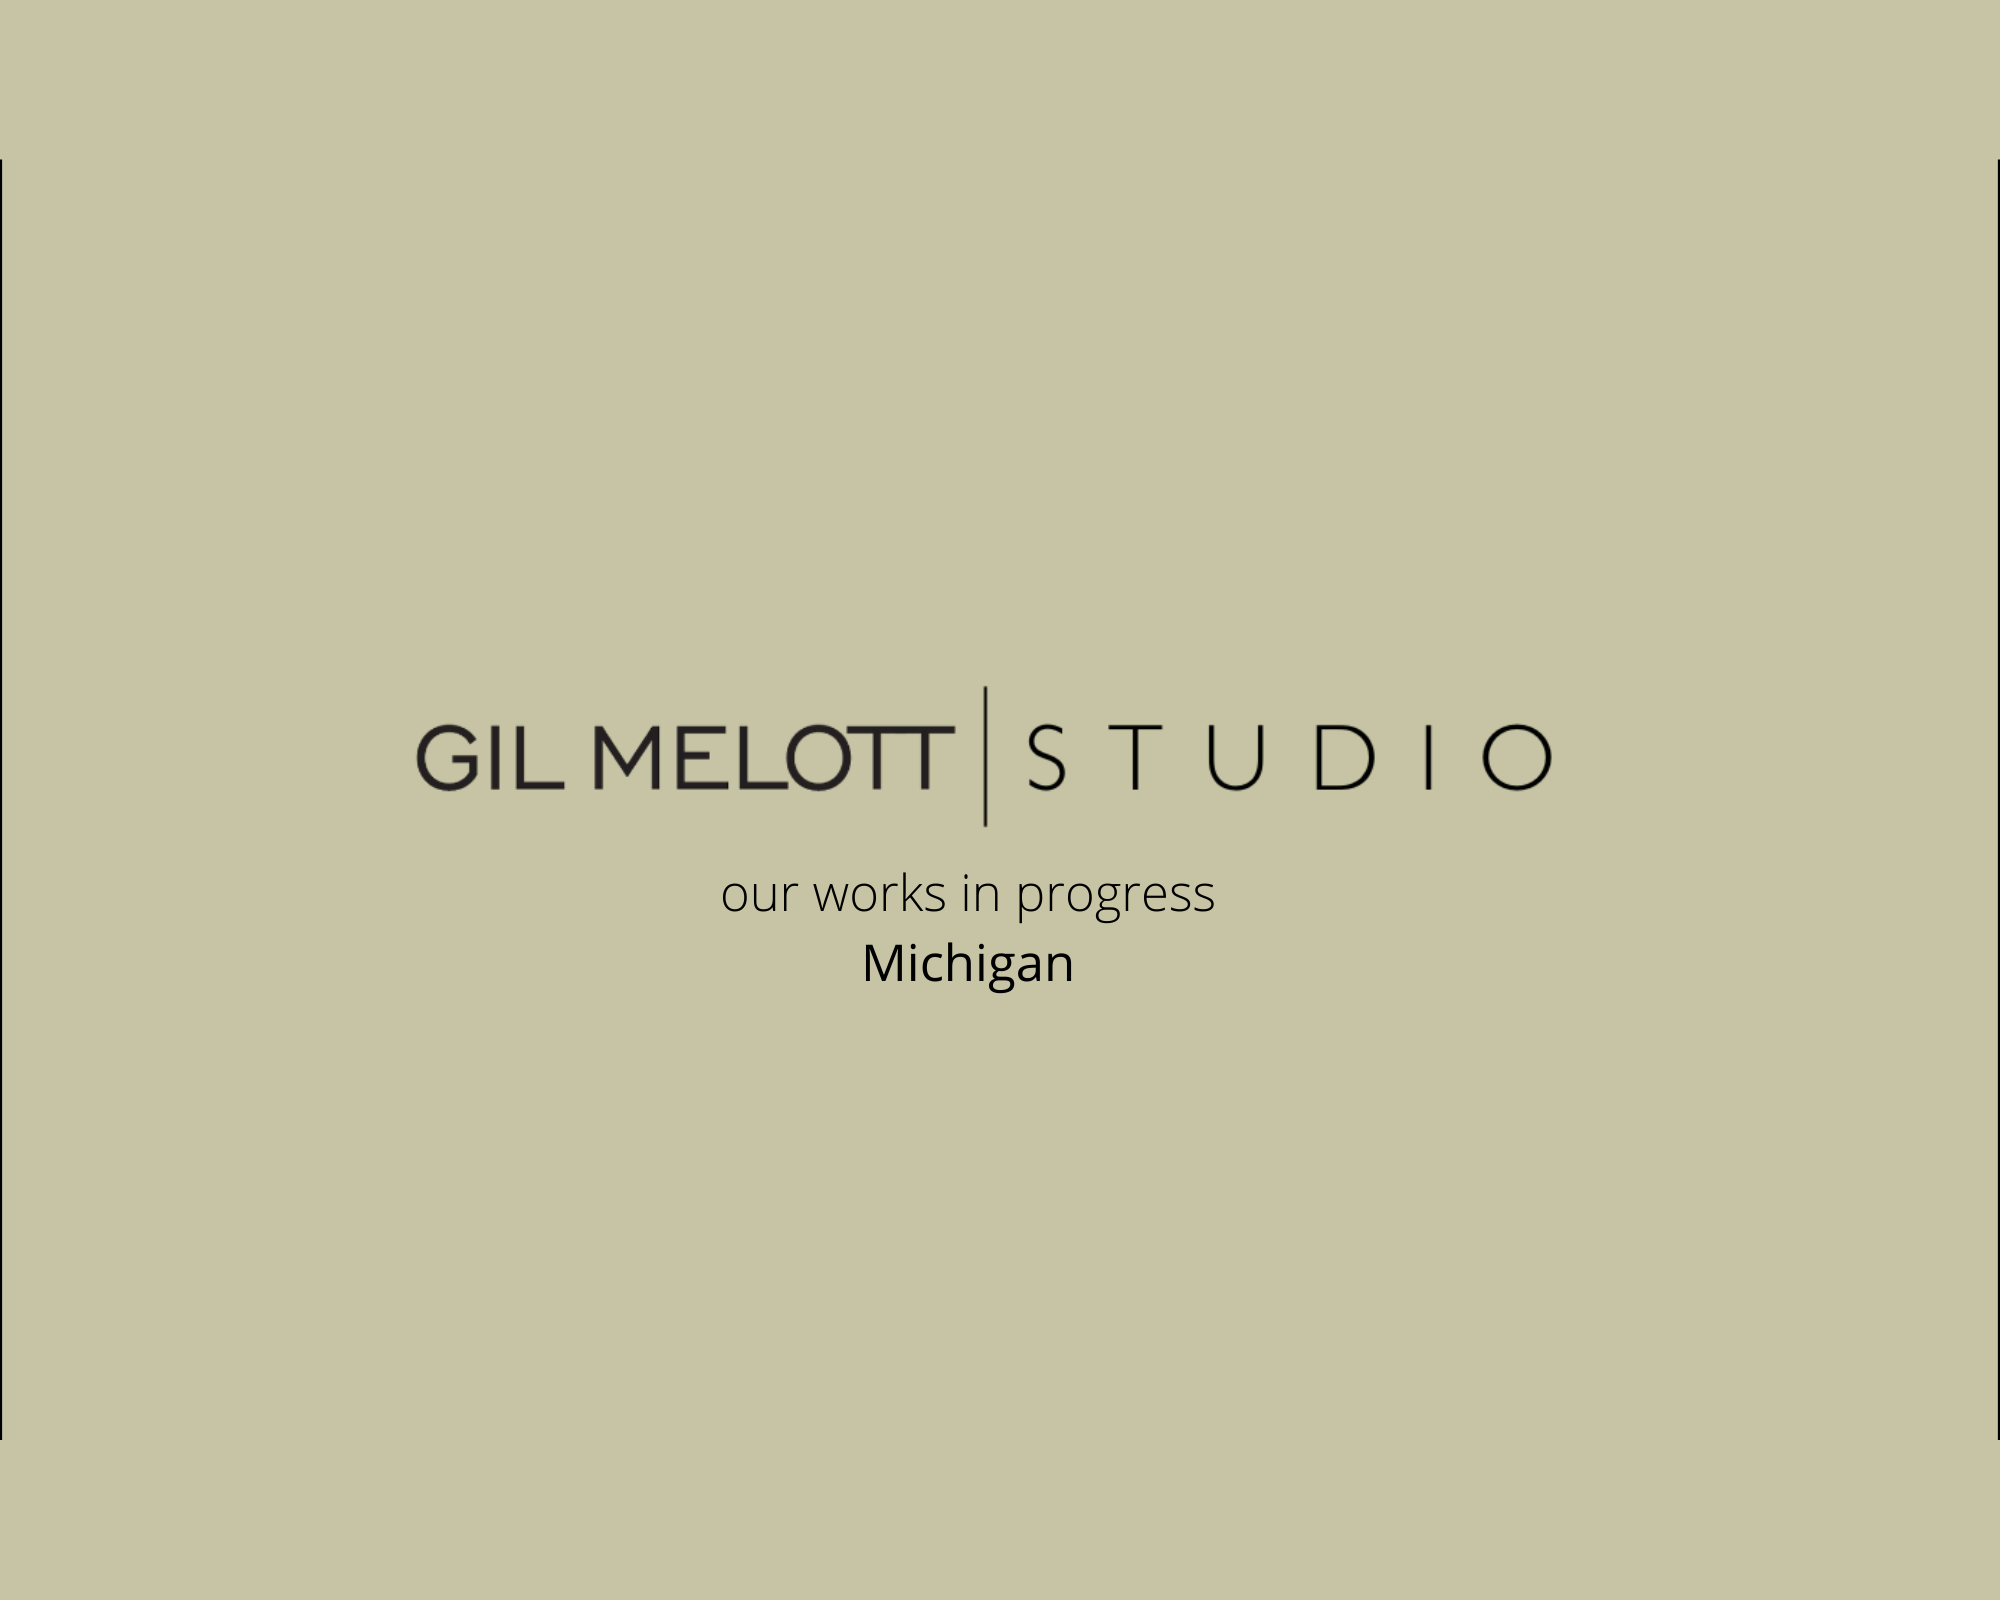 Gil Melott Studio is a luxury creative company focusing on high end residential and boutique hospitality interiors. Gil Melott Studio has been recognized for an unapologetic approach to integrating eras and styles in-16.png